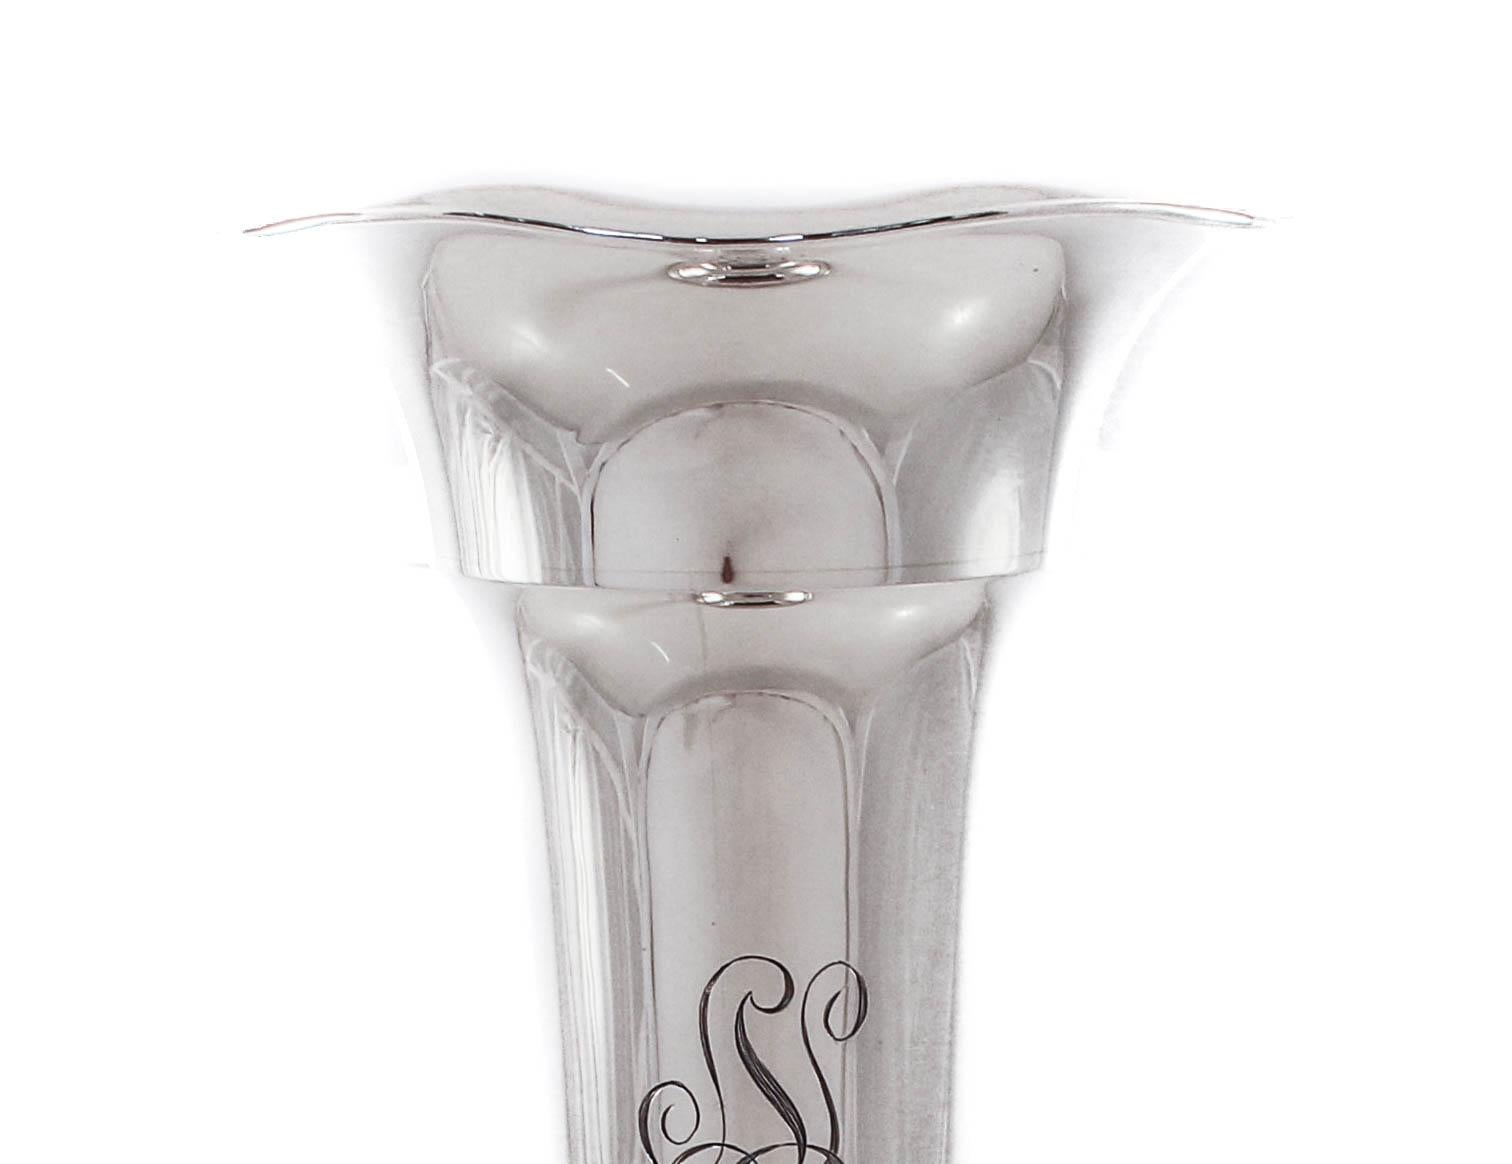 We are happy to offer this sterling silver vase by the Matthews Silver Company of Newark, NJ. It has a sleek and contemporary look; no etchings or decoration. The top is fluted and the body has a tailored shape. There’s a beautiful hand engraved